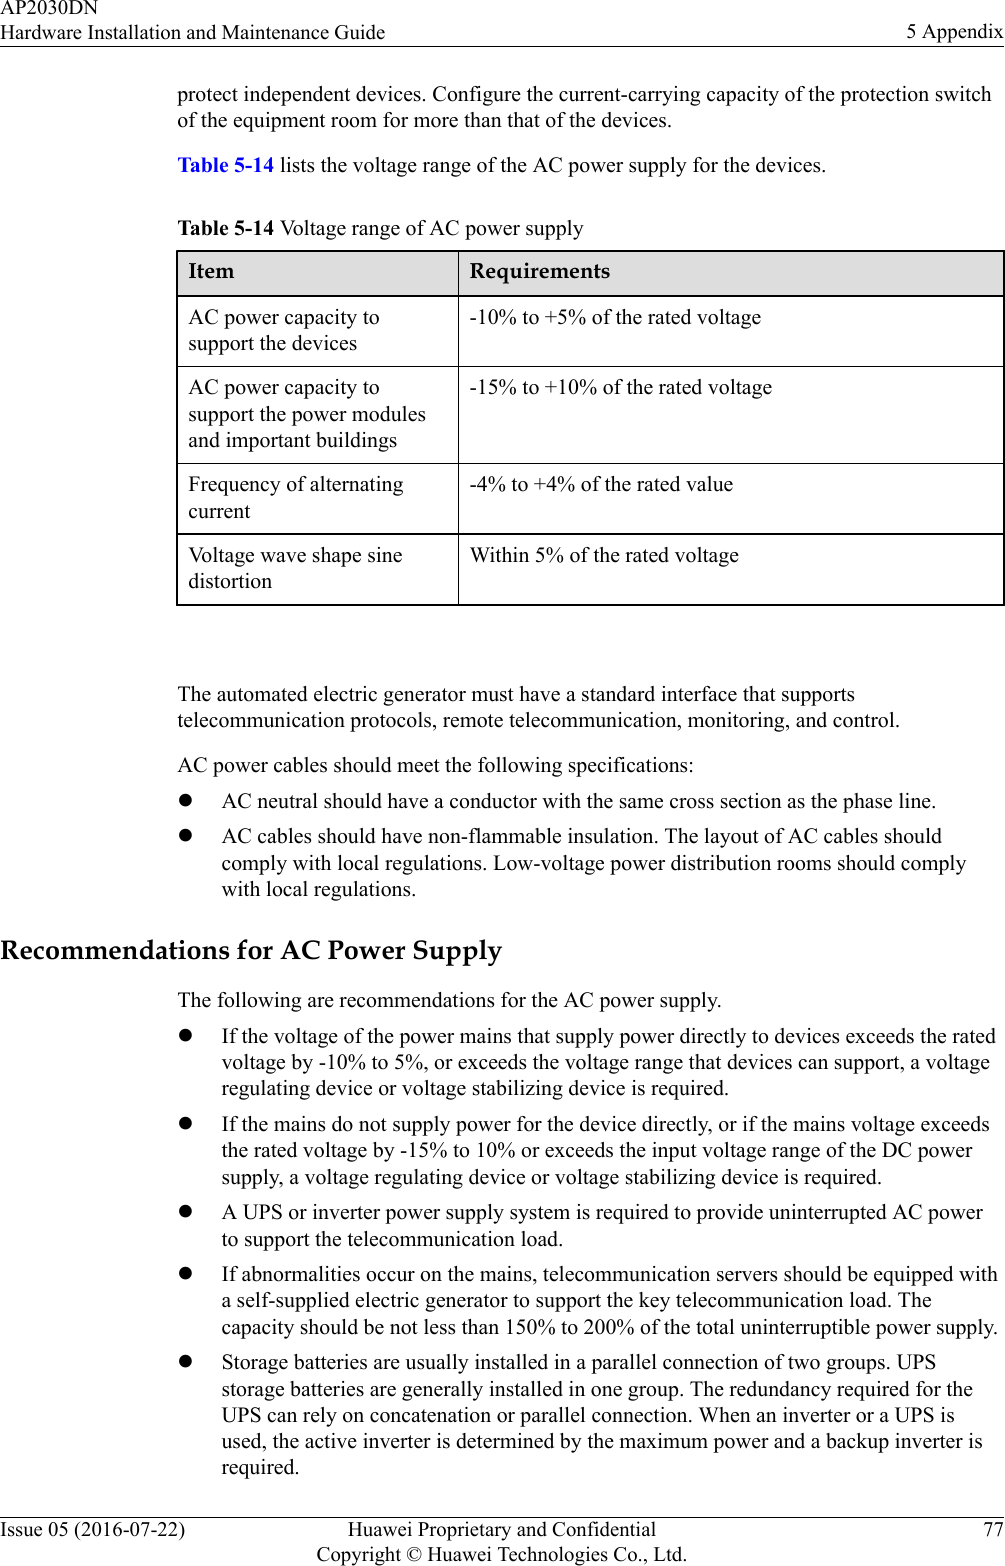 protect independent devices. Configure the current-carrying capacity of the protection switchof the equipment room for more than that of the devices.Table 5-14 lists the voltage range of the AC power supply for the devices.Table 5-14 Voltage range of AC power supplyItem RequirementsAC power capacity tosupport the devices-10% to +5% of the rated voltageAC power capacity tosupport the power modulesand important buildings-15% to +10% of the rated voltageFrequency of alternatingcurrent-4% to +4% of the rated valueVoltage wave shape sinedistortionWithin 5% of the rated voltage The automated electric generator must have a standard interface that supportstelecommunication protocols, remote telecommunication, monitoring, and control.AC power cables should meet the following specifications:lAC neutral should have a conductor with the same cross section as the phase line.lAC cables should have non-flammable insulation. The layout of AC cables shouldcomply with local regulations. Low-voltage power distribution rooms should complywith local regulations.Recommendations for AC Power SupplyThe following are recommendations for the AC power supply.lIf the voltage of the power mains that supply power directly to devices exceeds the ratedvoltage by -10% to 5%, or exceeds the voltage range that devices can support, a voltageregulating device or voltage stabilizing device is required.lIf the mains do not supply power for the device directly, or if the mains voltage exceedsthe rated voltage by -15% to 10% or exceeds the input voltage range of the DC powersupply, a voltage regulating device or voltage stabilizing device is required.lA UPS or inverter power supply system is required to provide uninterrupted AC powerto support the telecommunication load.lIf abnormalities occur on the mains, telecommunication servers should be equipped witha self-supplied electric generator to support the key telecommunication load. Thecapacity should be not less than 150% to 200% of the total uninterruptible power supply.lStorage batteries are usually installed in a parallel connection of two groups. UPSstorage batteries are generally installed in one group. The redundancy required for theUPS can rely on concatenation or parallel connection. When an inverter or a UPS isused, the active inverter is determined by the maximum power and a backup inverter isrequired.AP2030DNHardware Installation and Maintenance Guide 5 AppendixIssue 05 (2016-07-22) Huawei Proprietary and ConfidentialCopyright © Huawei Technologies Co., Ltd.77